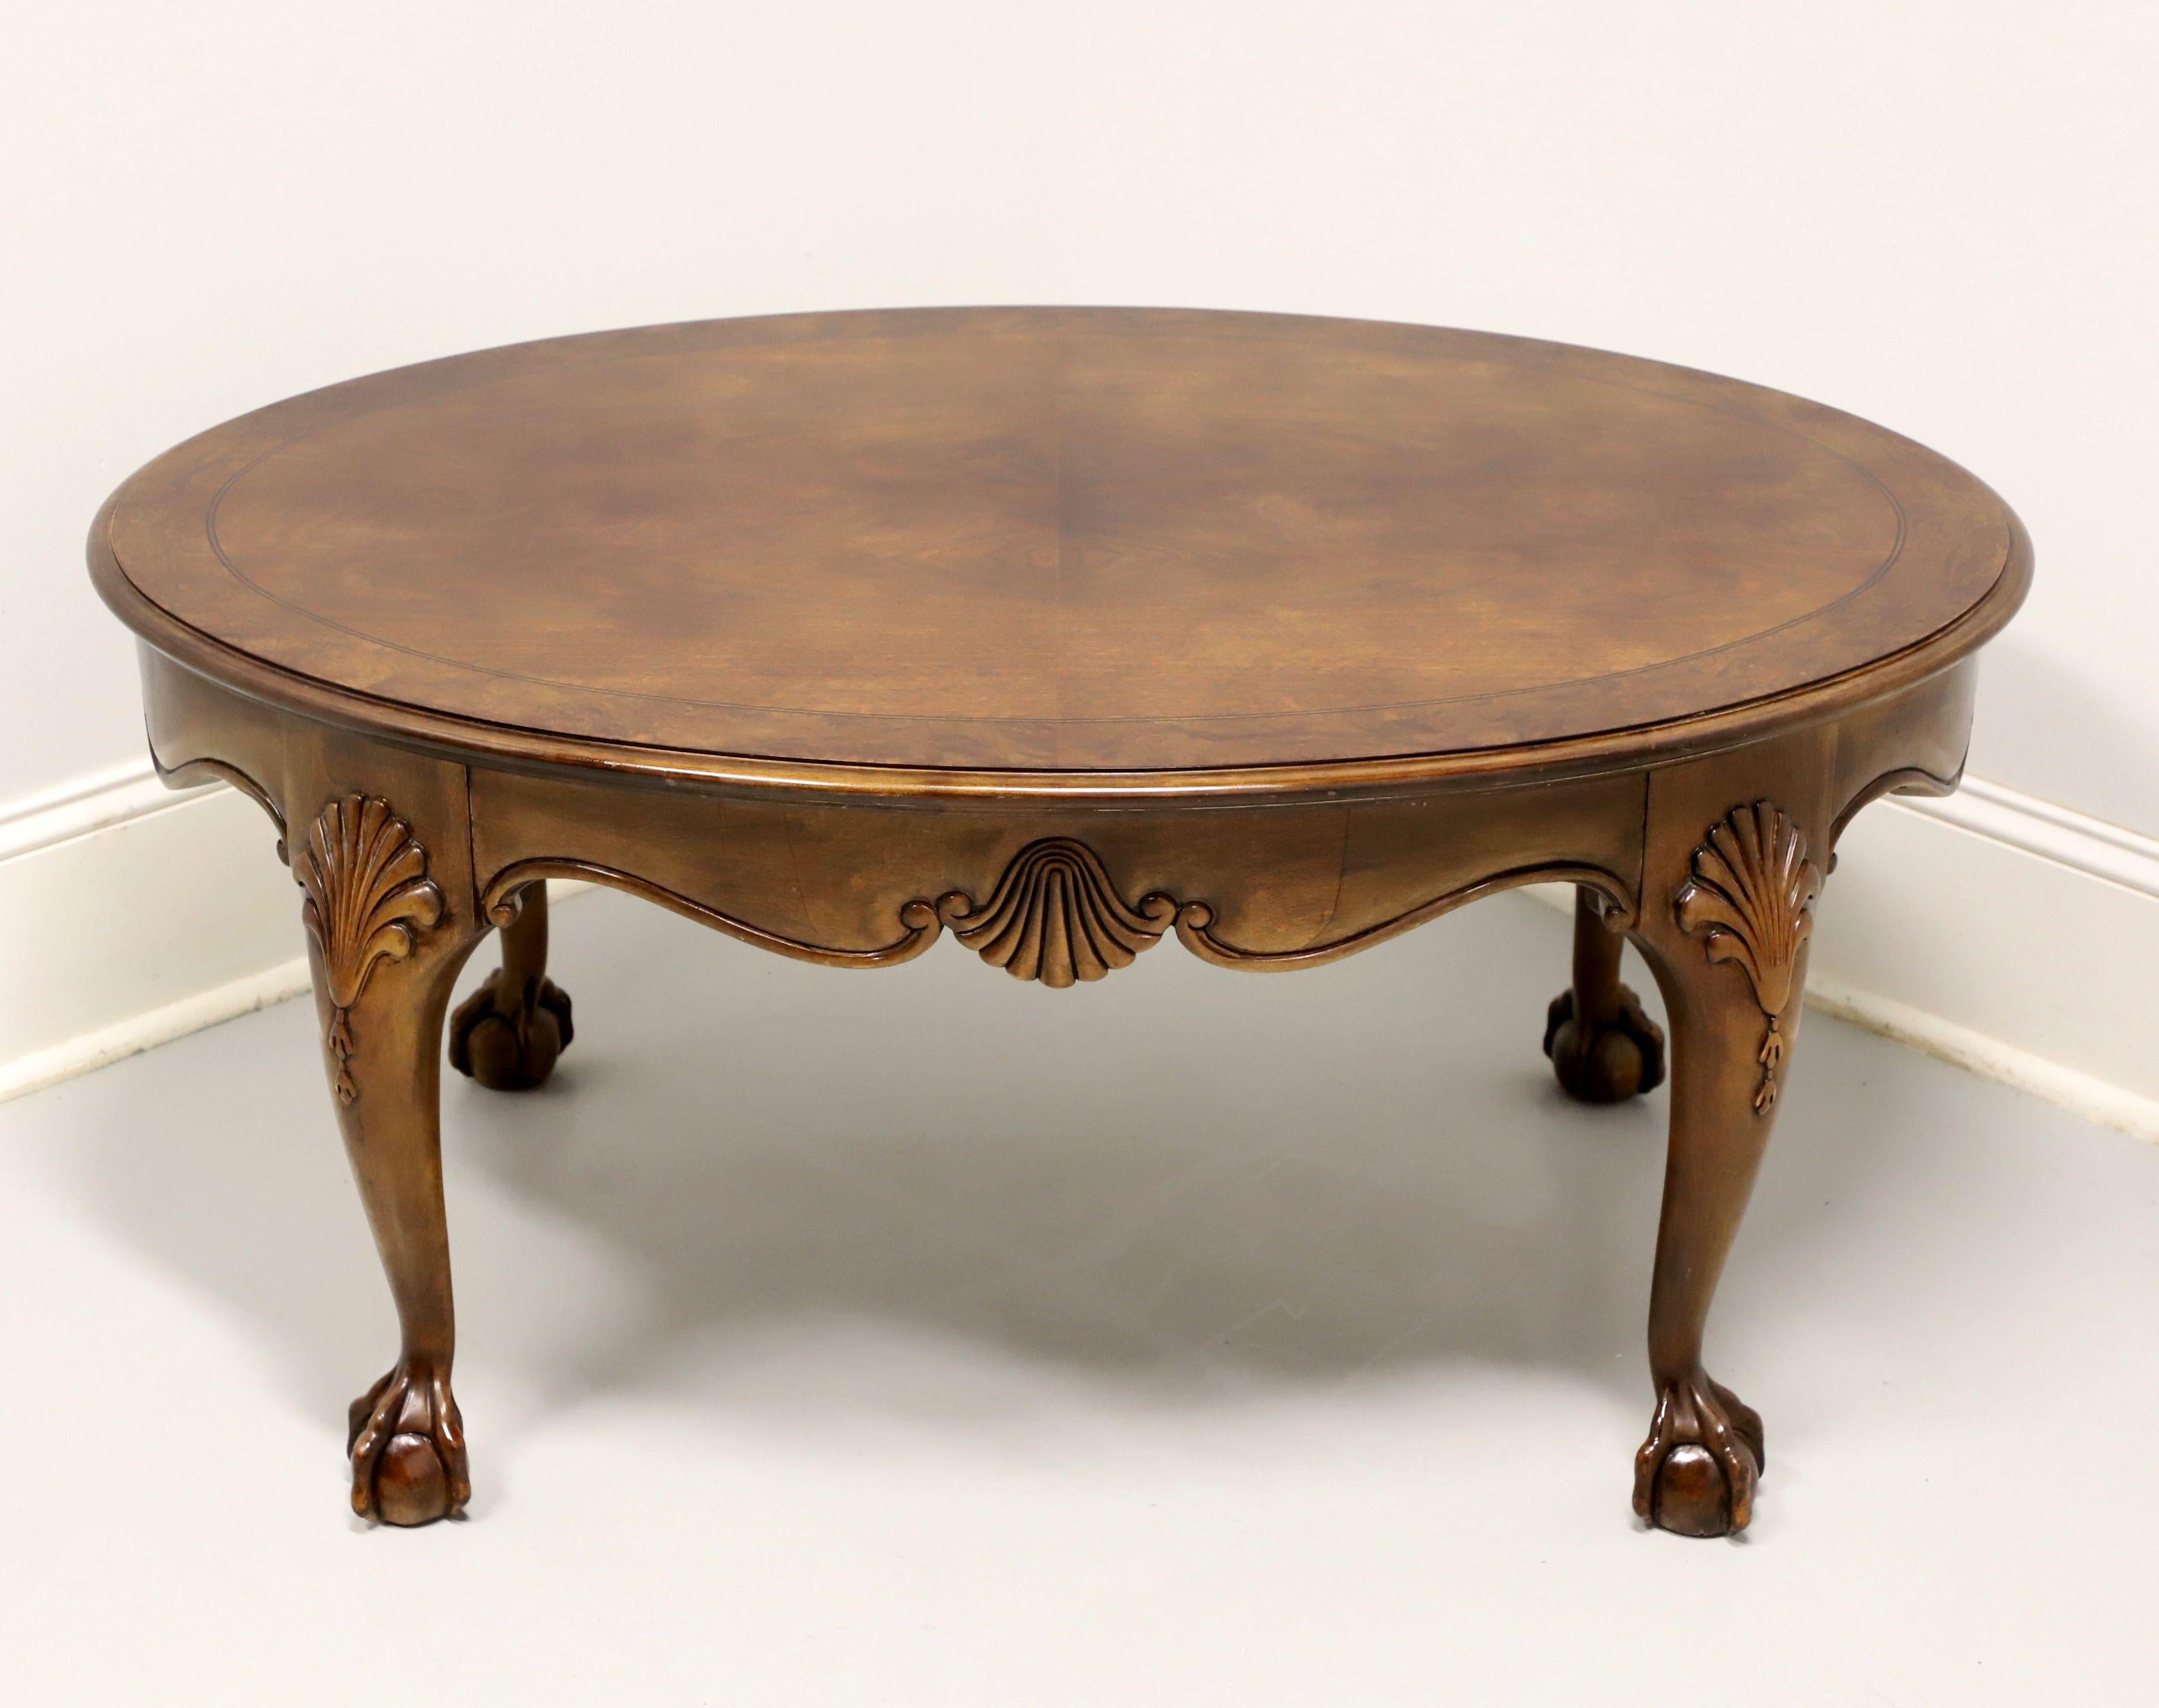 An oval Chippendale style coffee table, unbranded, similar quality to Drexel or Thomasville. Walnut with bookmatched & burlwood banded top, decorative fan carved to apron & knees, and ball in claw feet. Made in the USA, in the late 20th